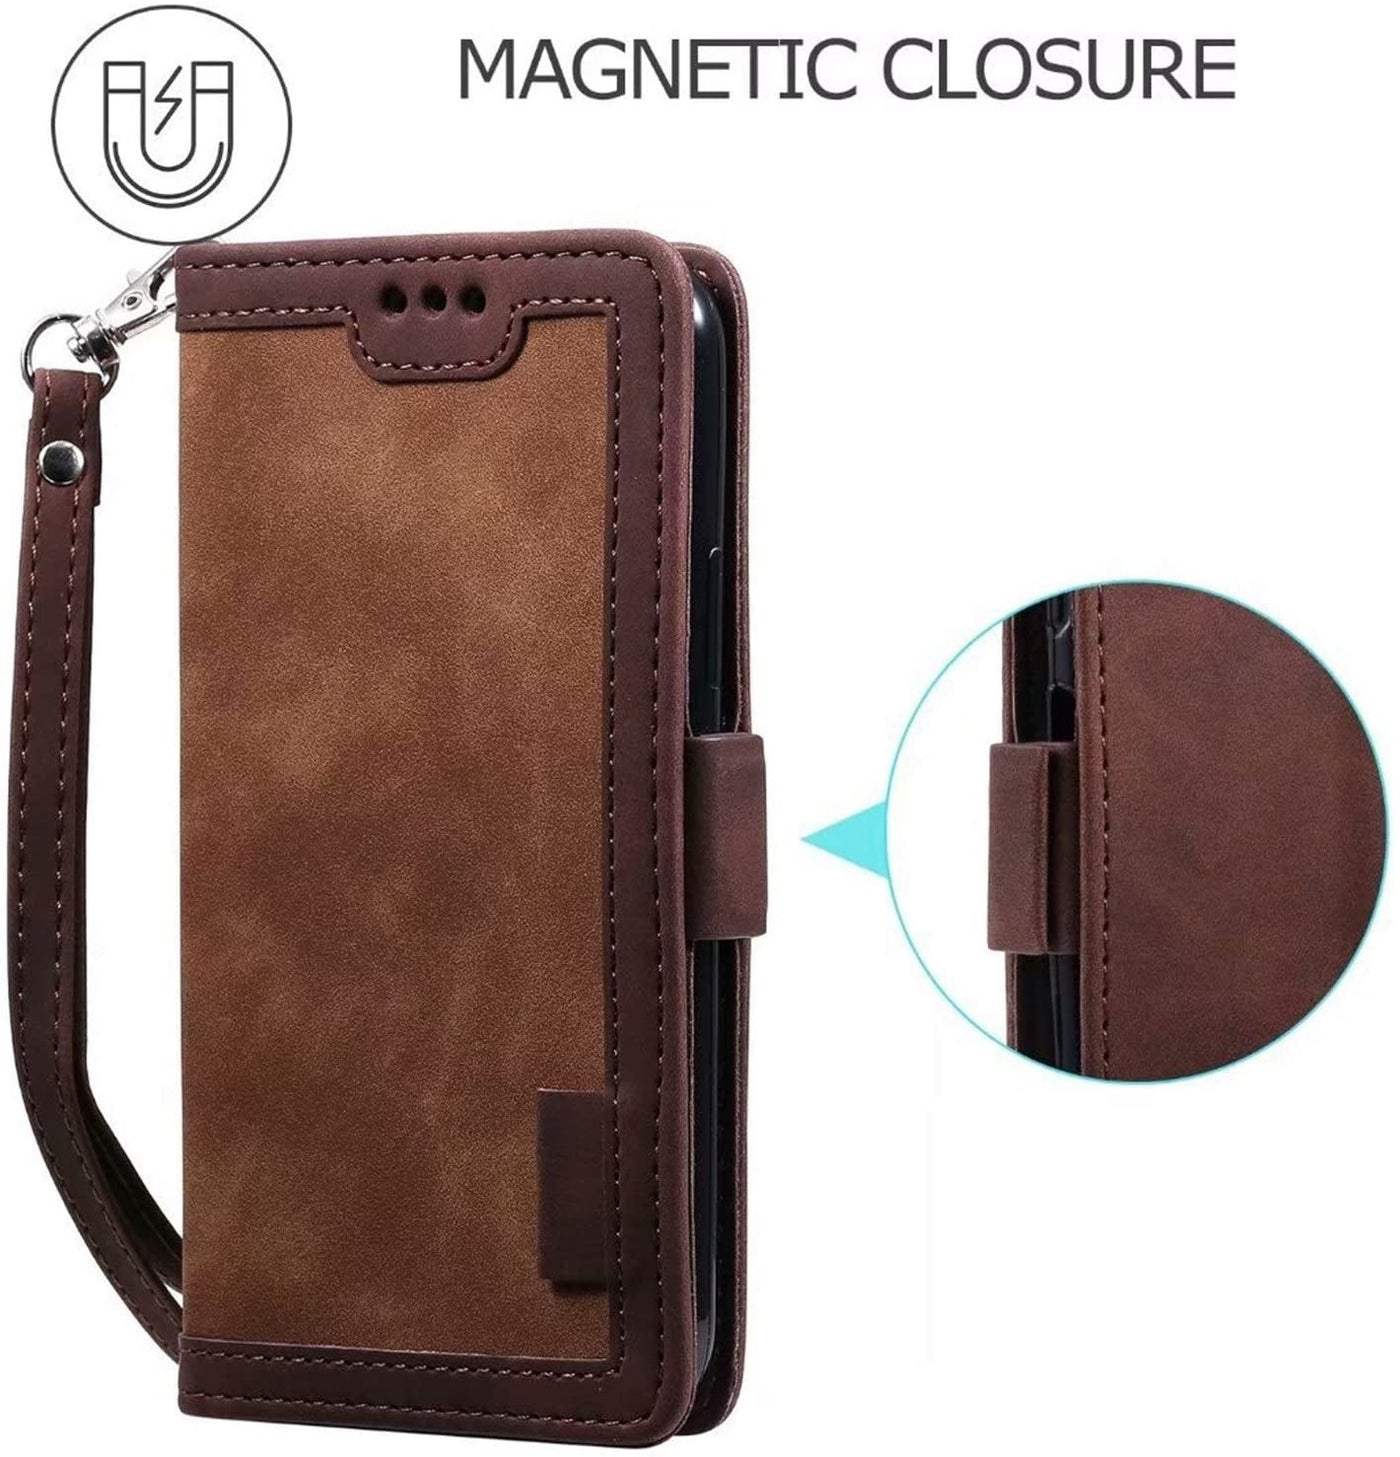 Samsung Galaxy S20 FE Magnetic flip Wallet case cover